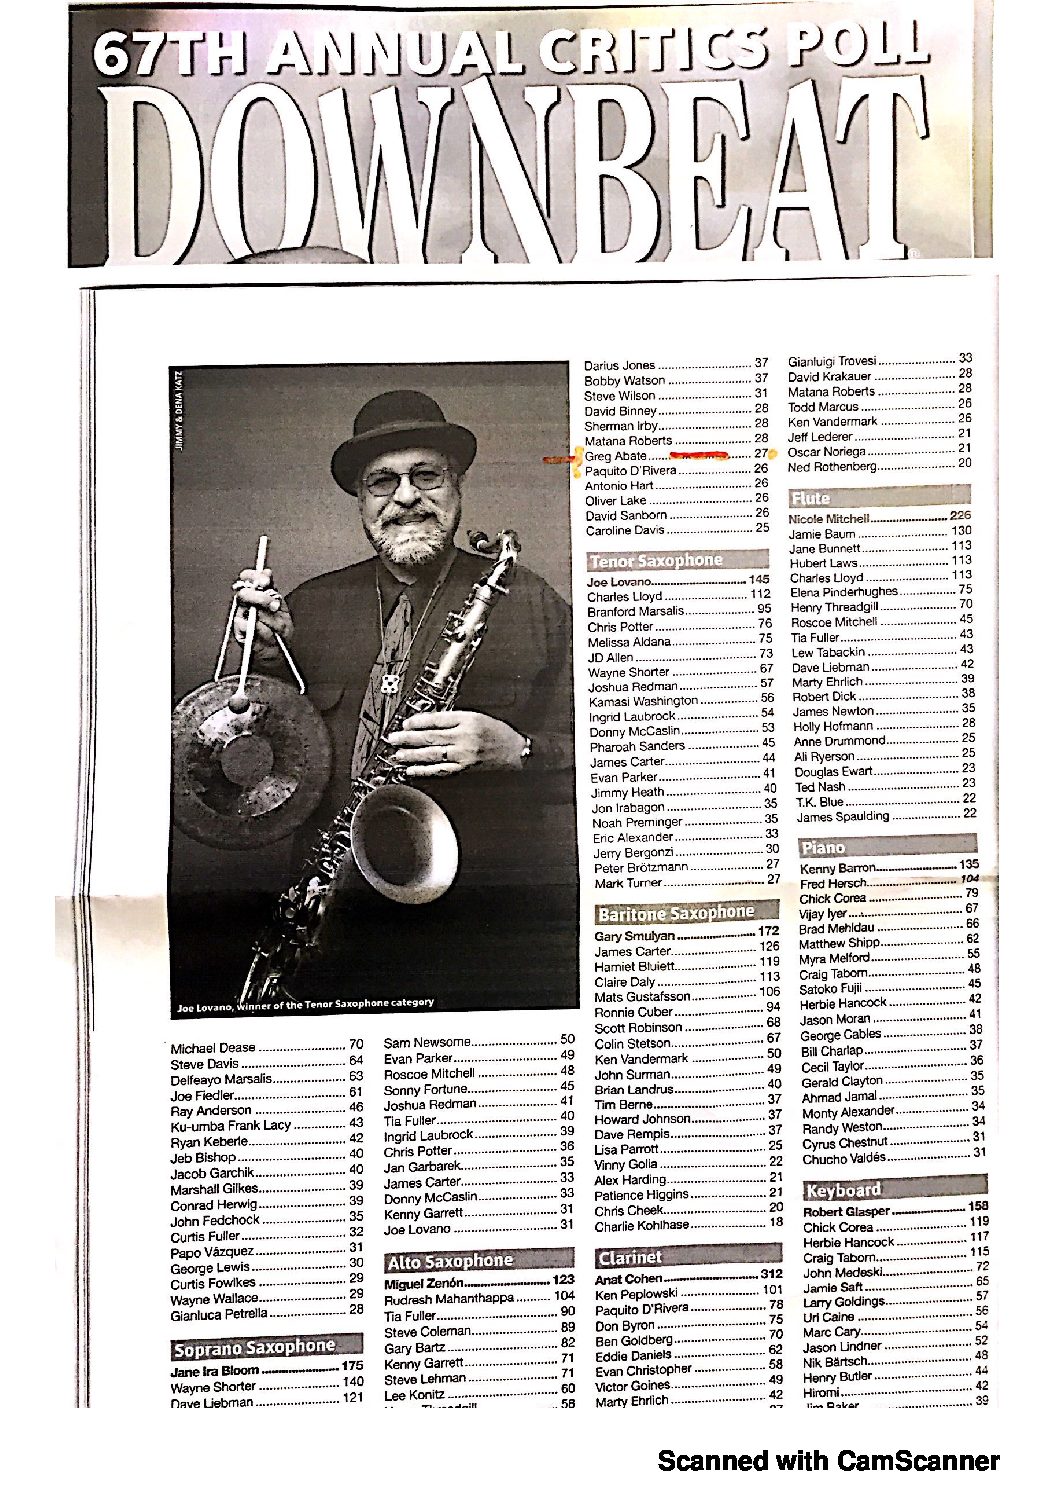 Greg Abate featured in 67th annual Downbeat Critics Poll